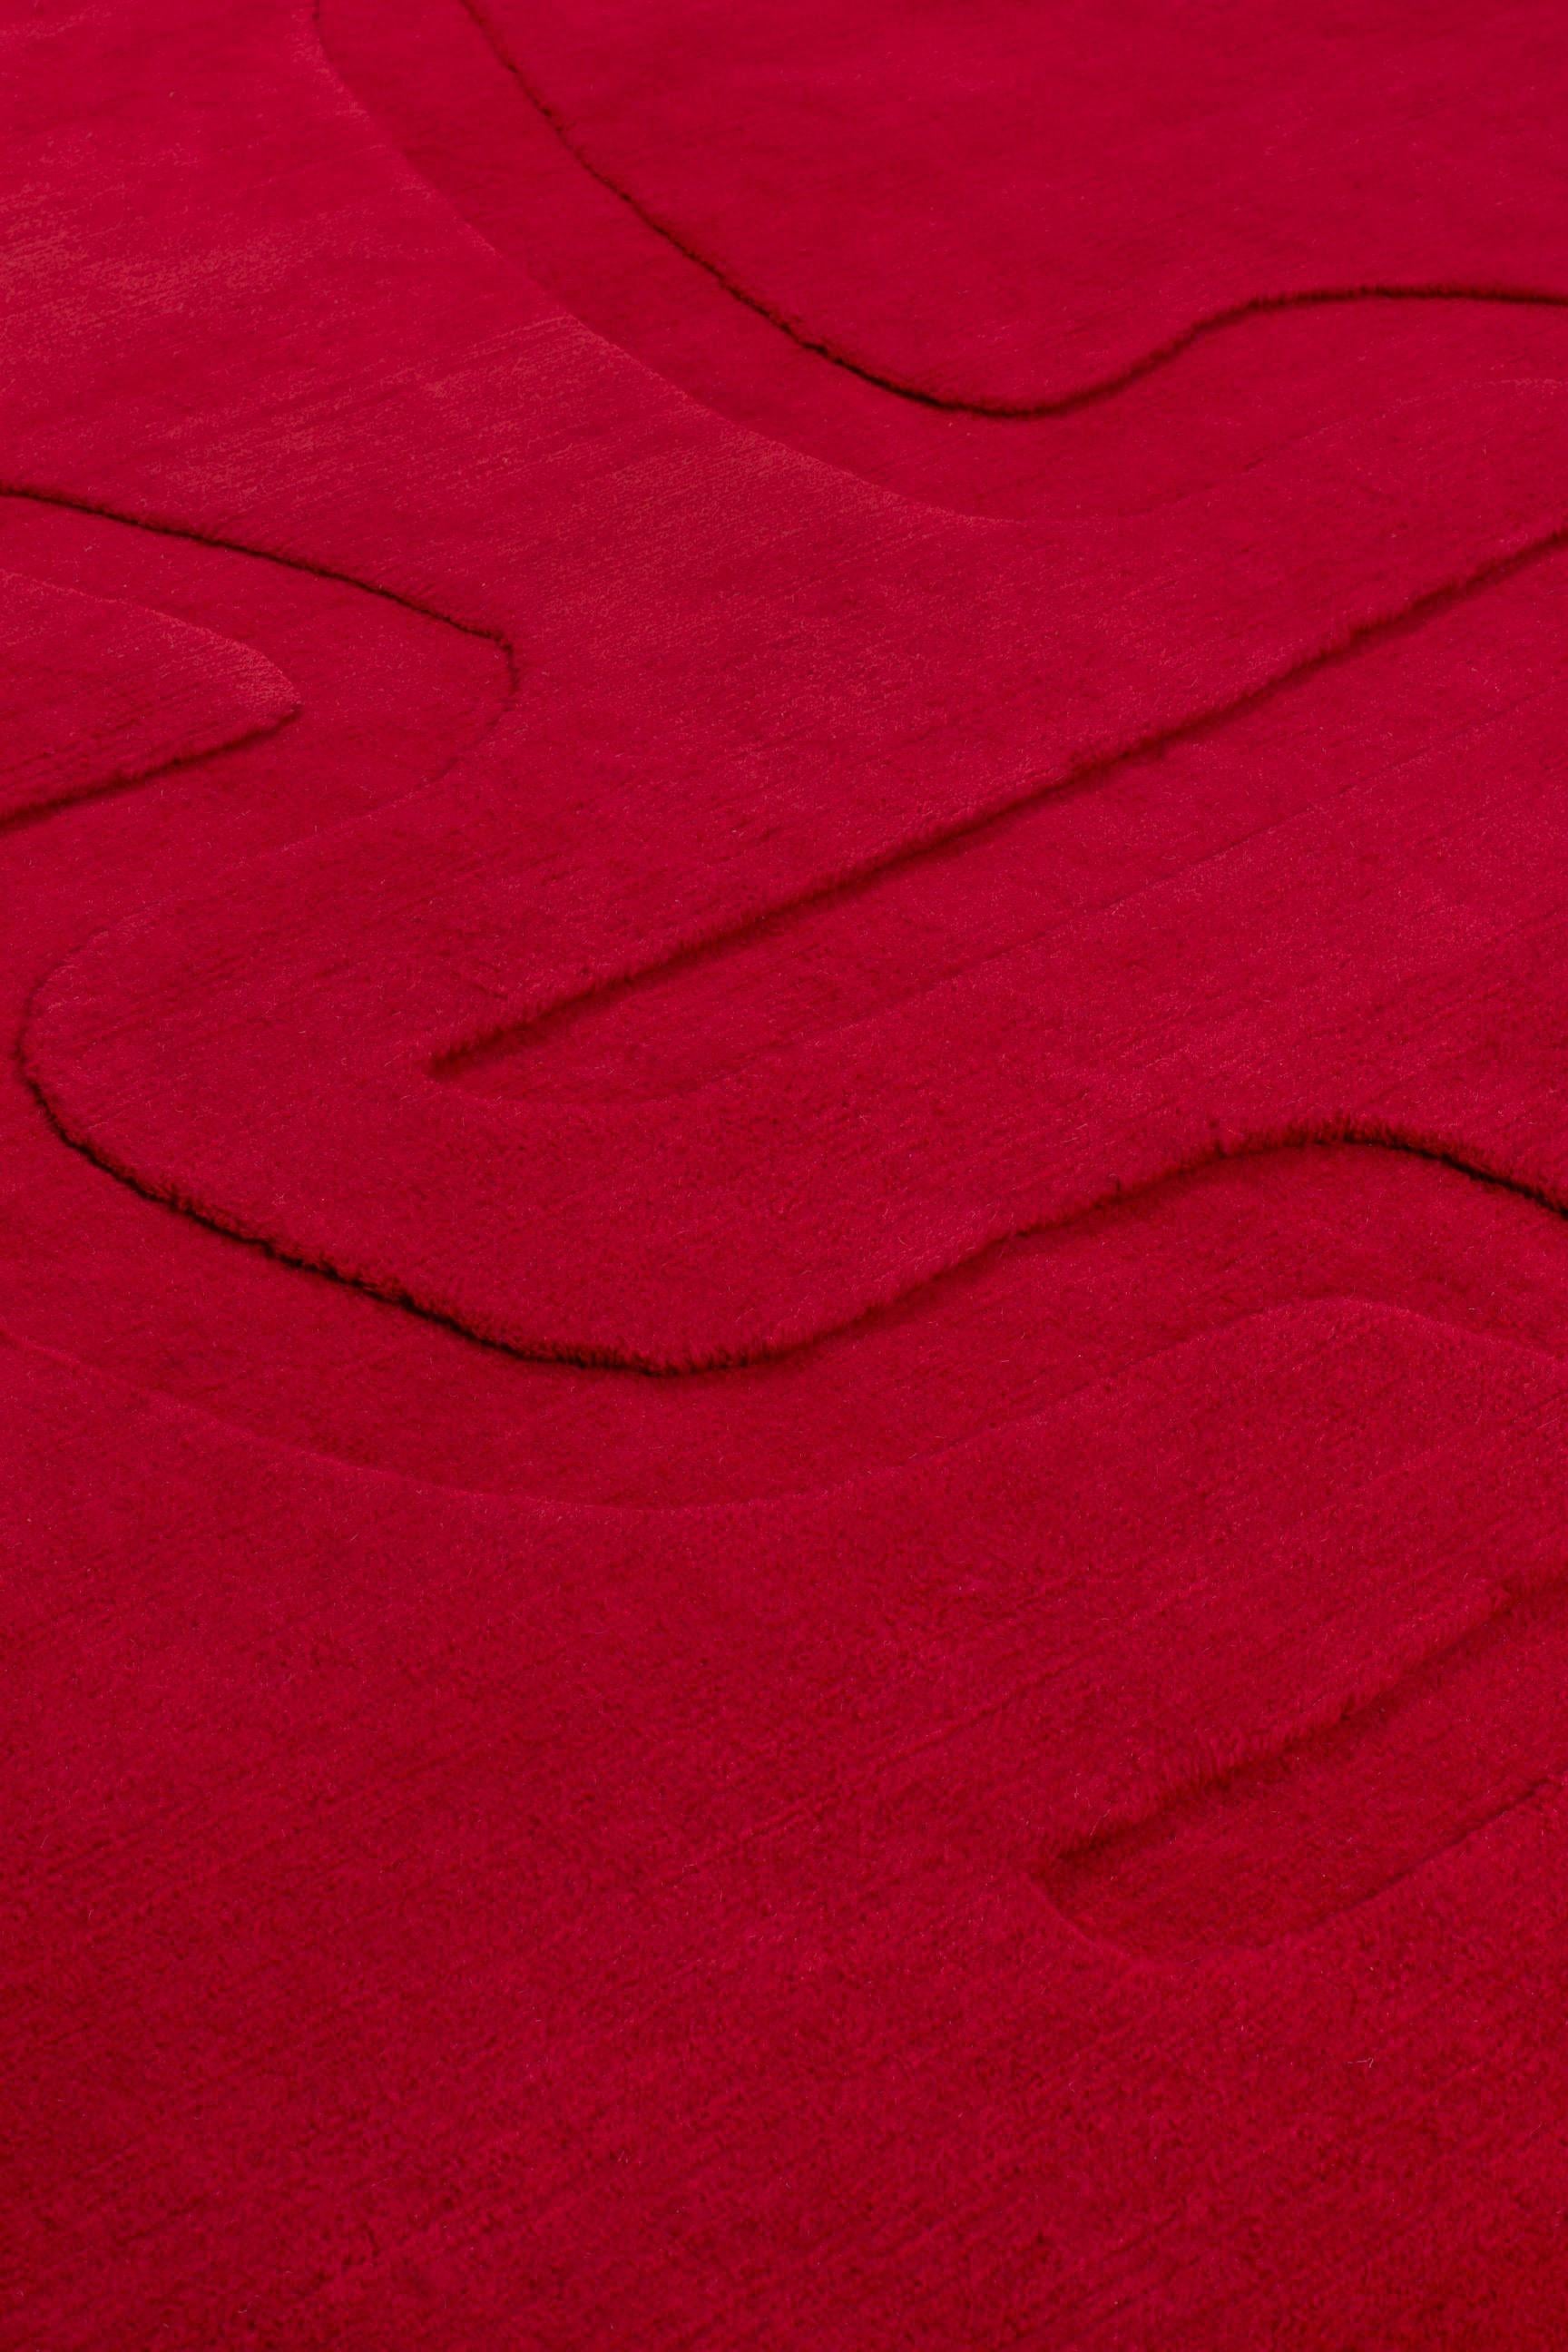 Modern cc-tapis Vérité Rug Cassina Details Collection by Charlotte Perriand For Sale